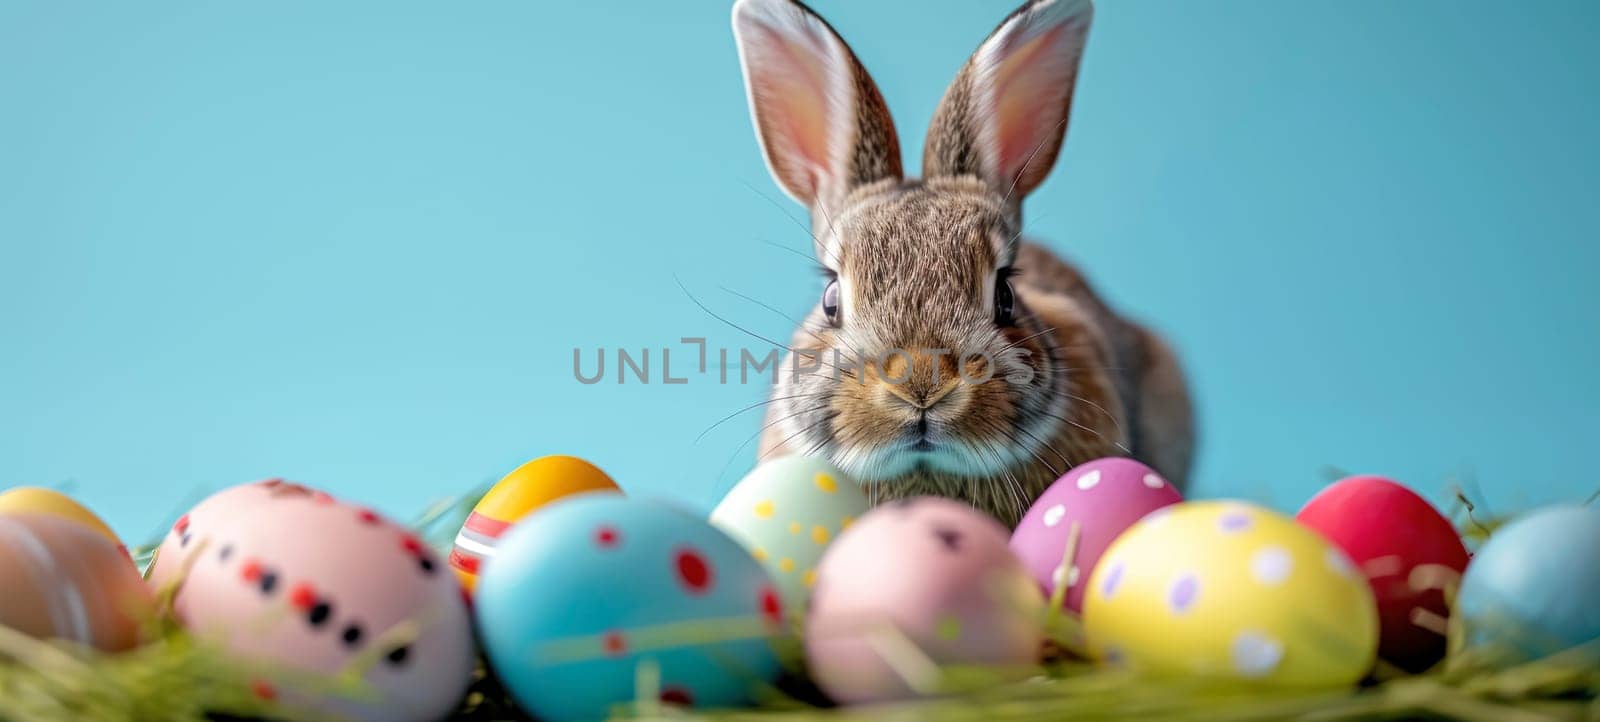 Easter banner with colorful painted eggs and a little bunny rabbit on a blue background with copy space. Happy Easter greeting card.